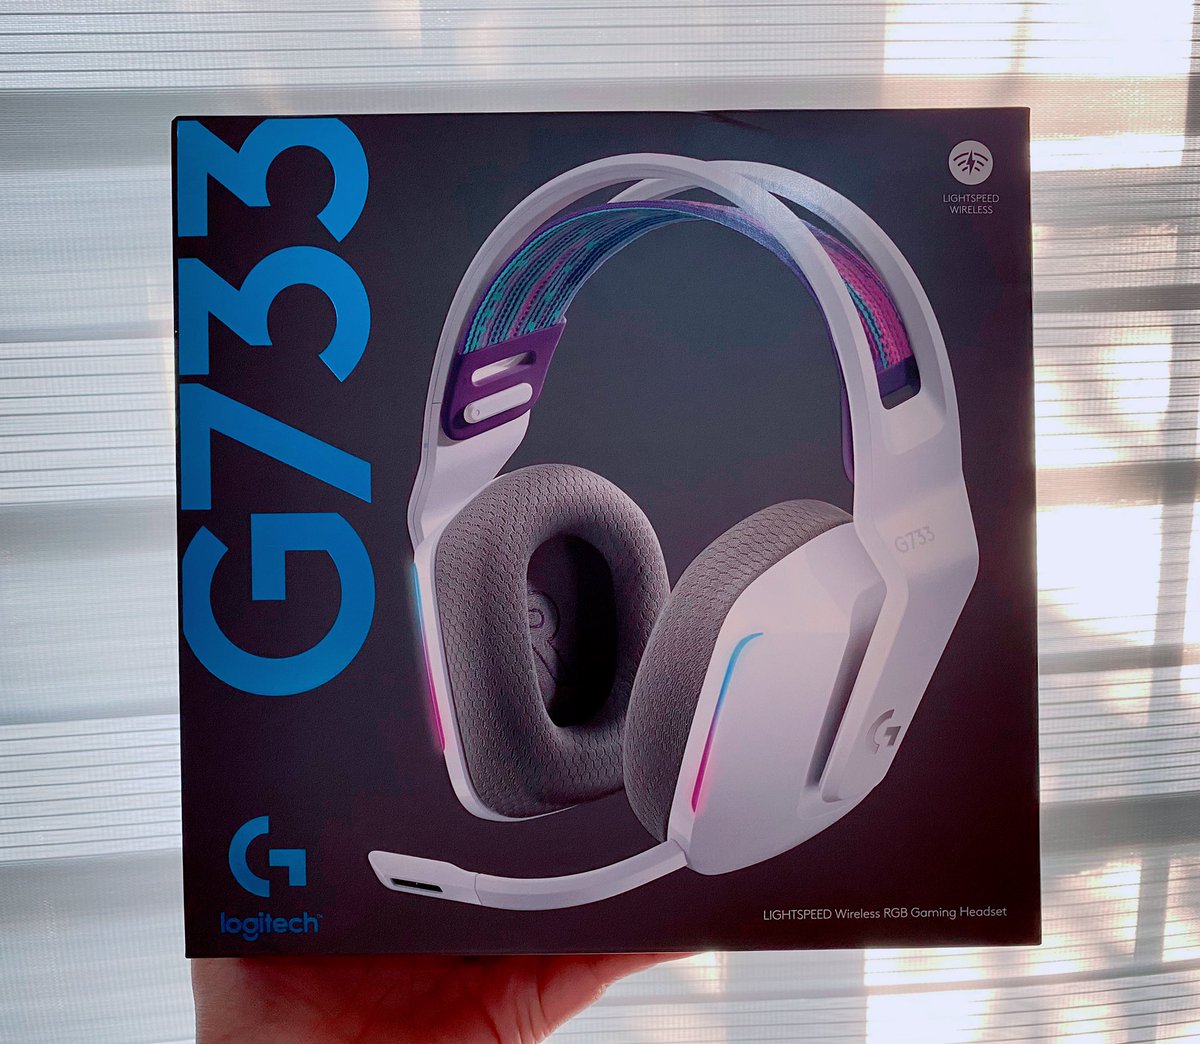 I forgot to add the table in this thread (partly because I changed it), but the headset is heeeere Keeb will arrive next week!